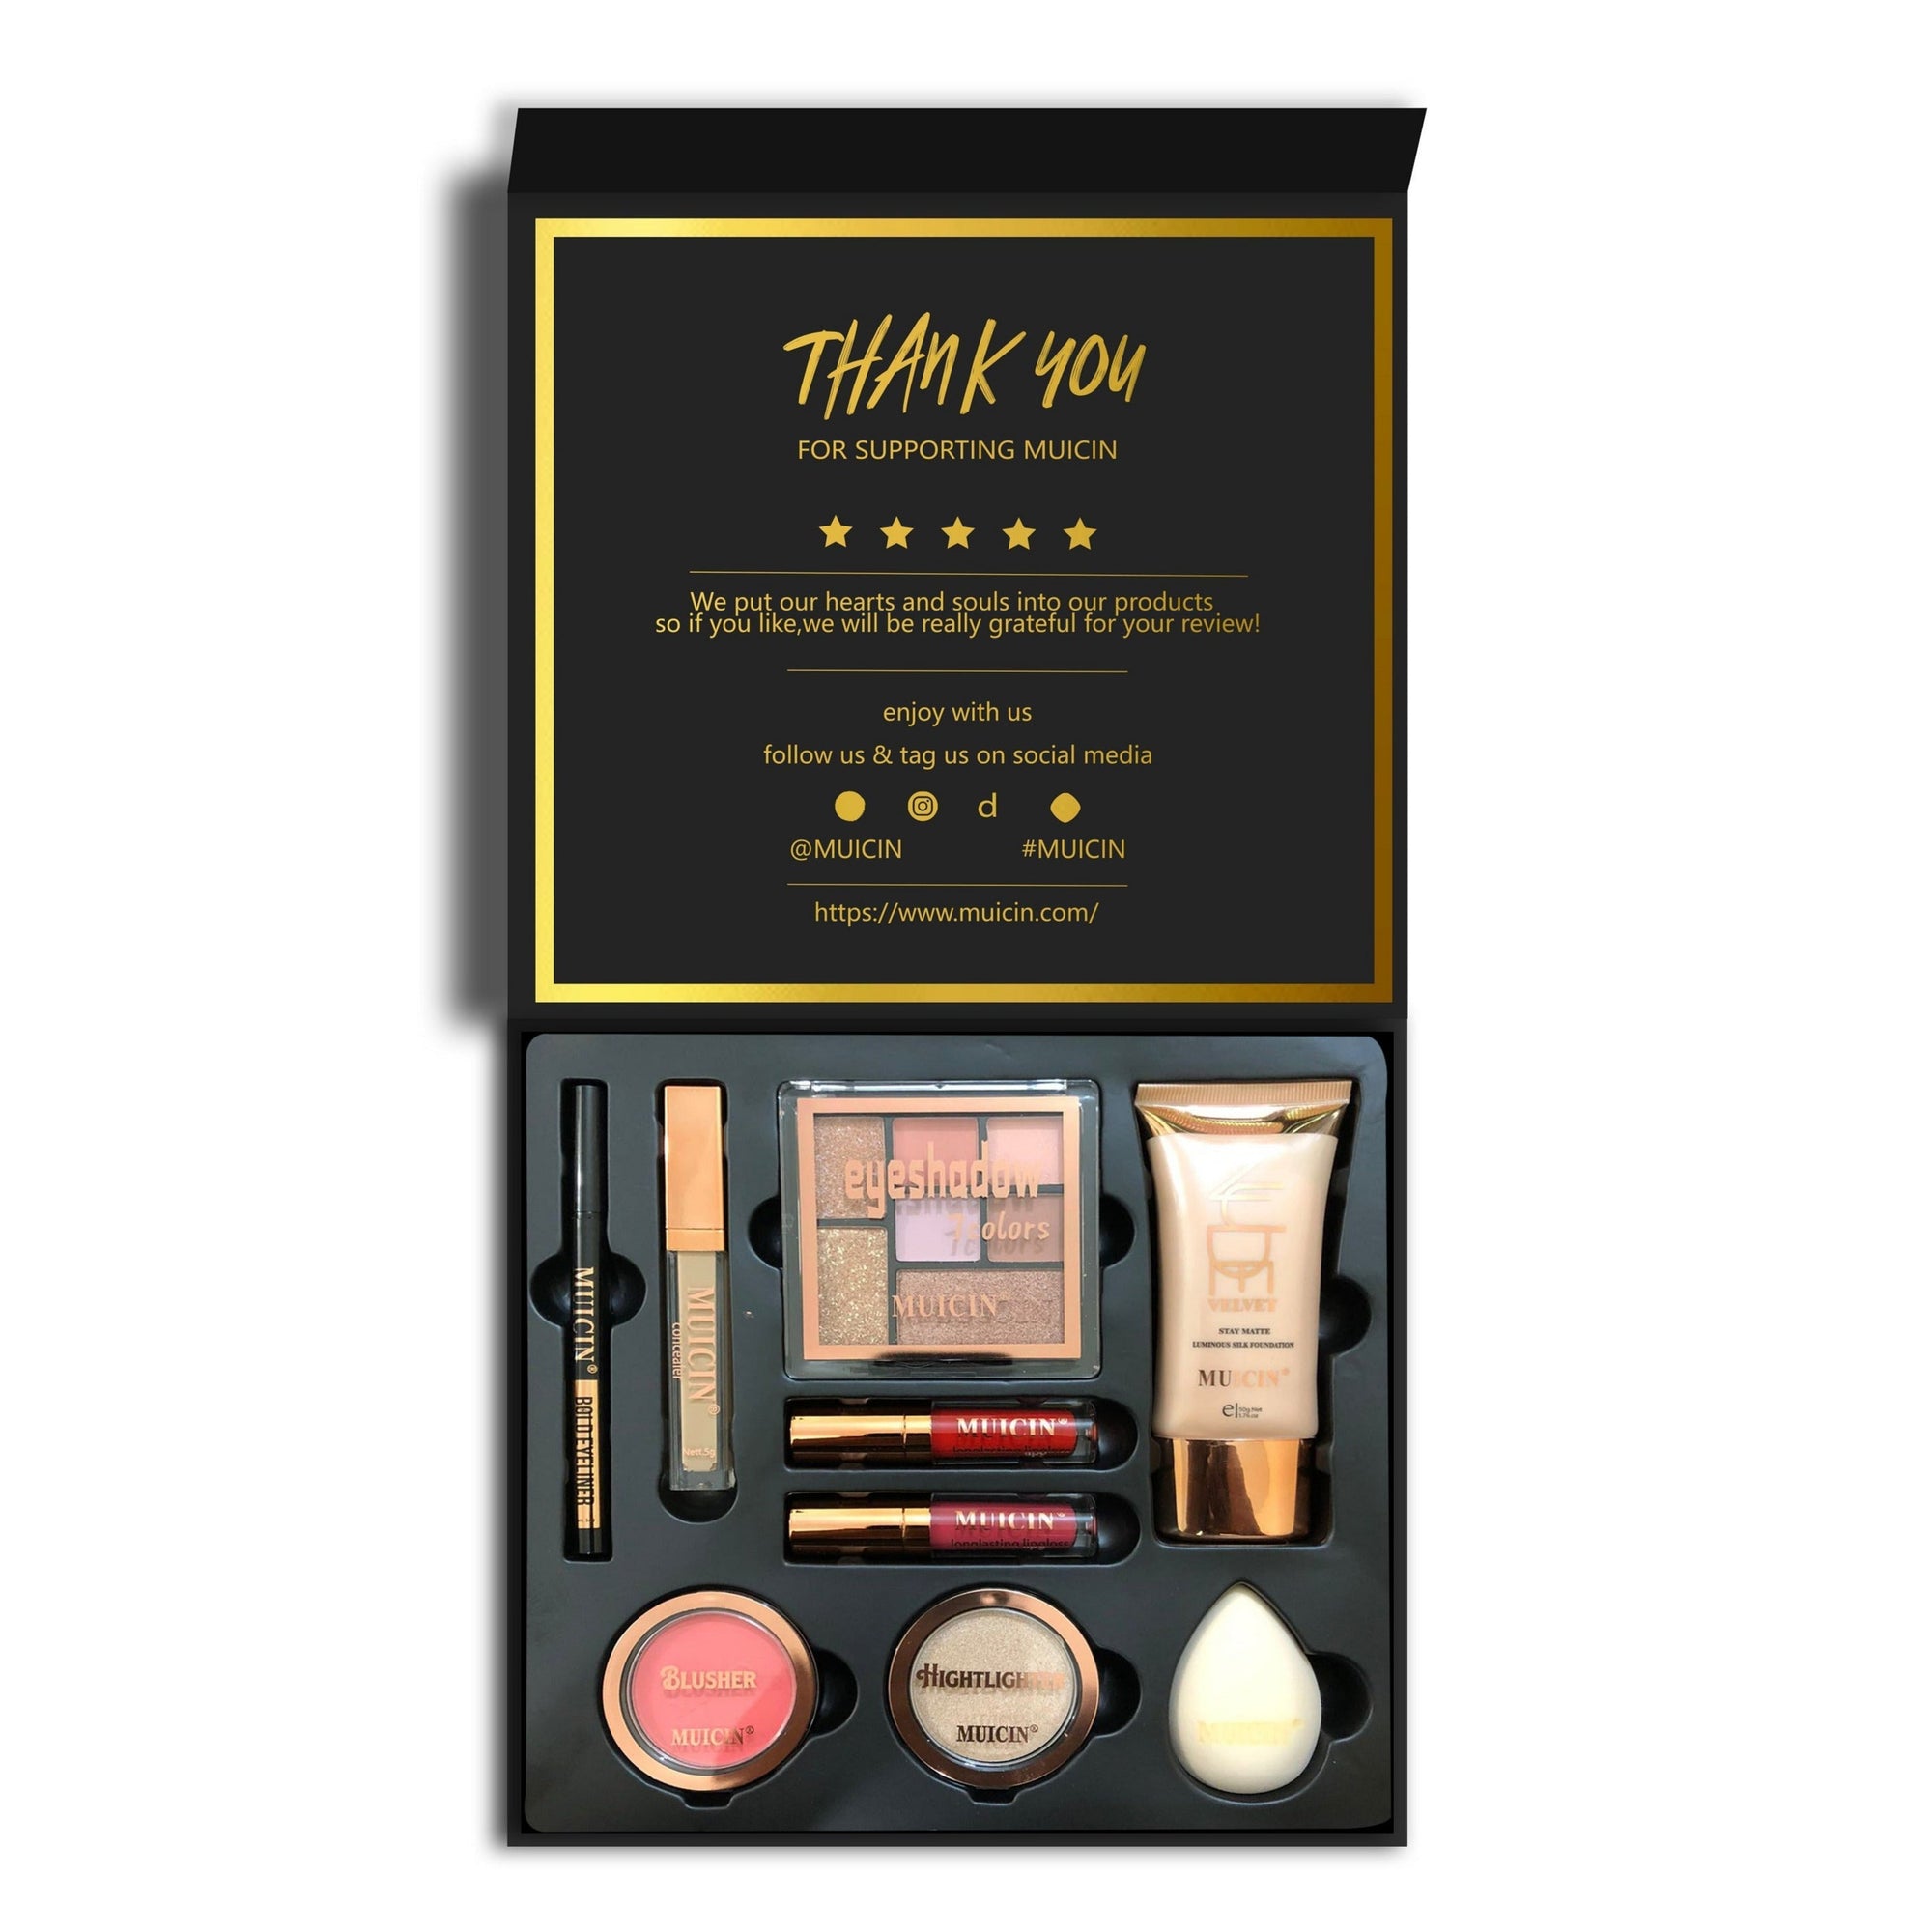 Buy  MUICIN - 9 in 1 Everyday Professional Makeup Kit - Fair at Best Price Online in Pakistan